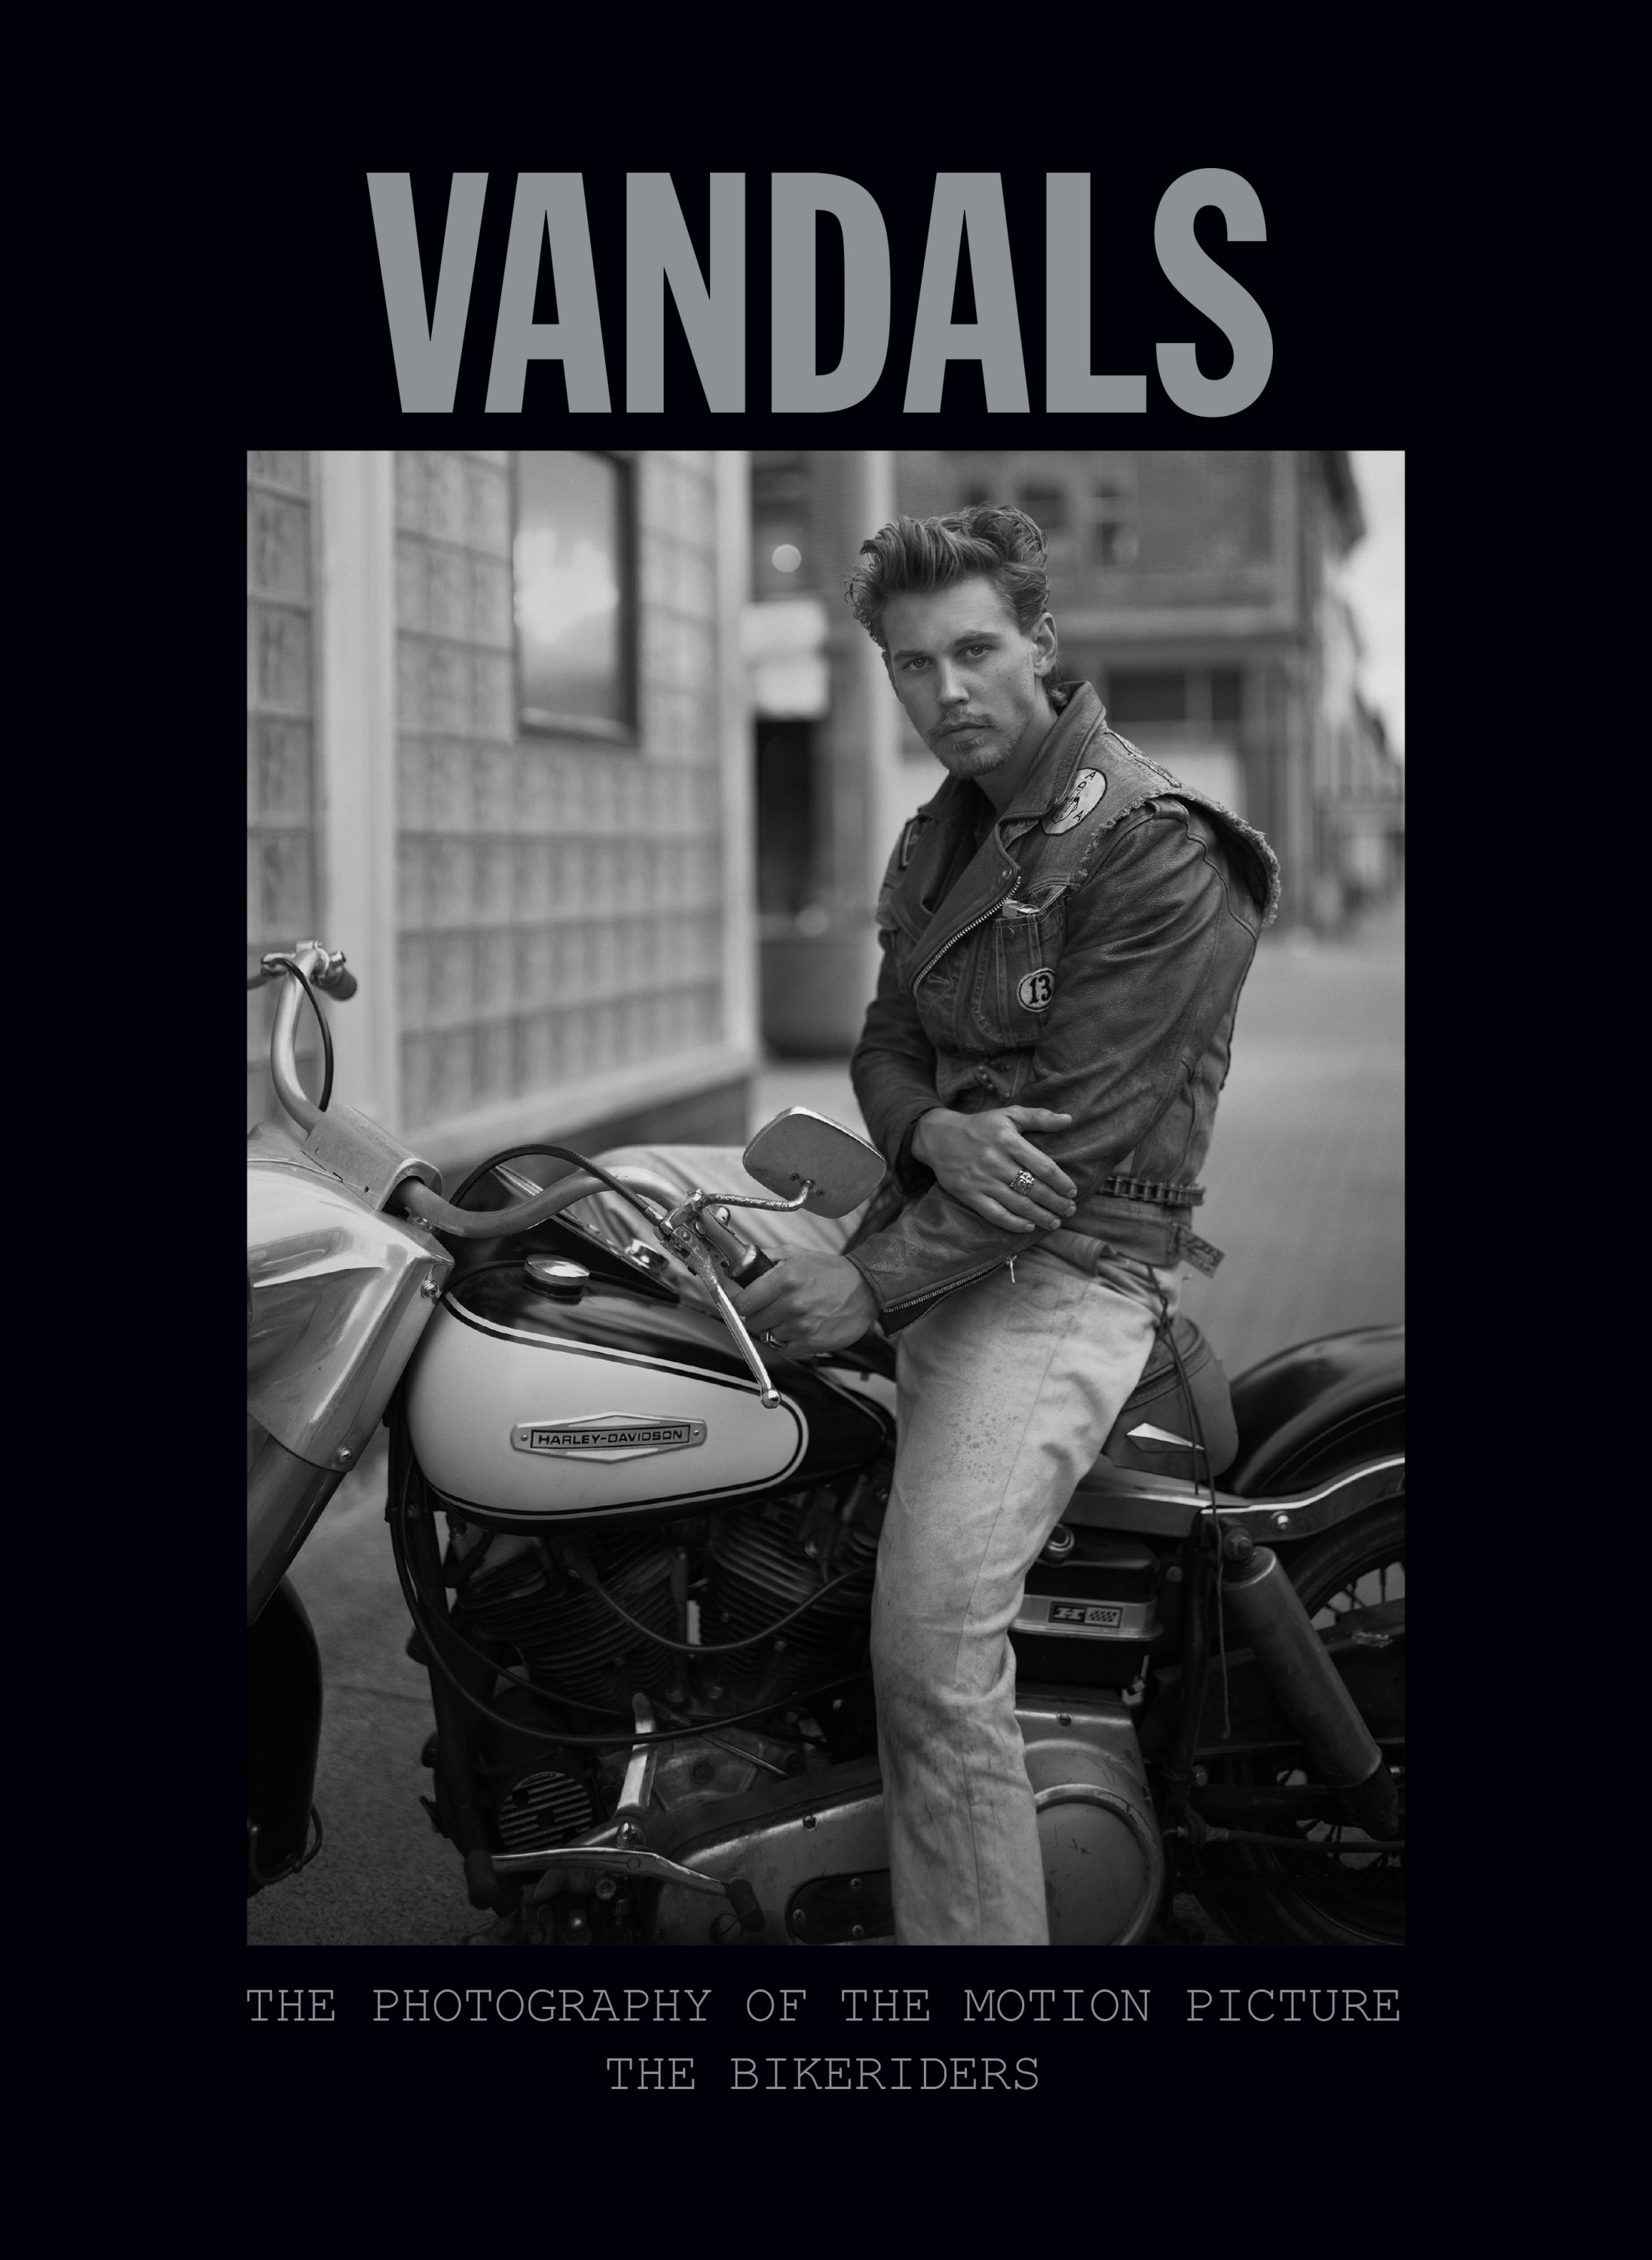 Austin Butler on the cover of Vandals: The Photography of The Bikeriders, published by Insight Editions